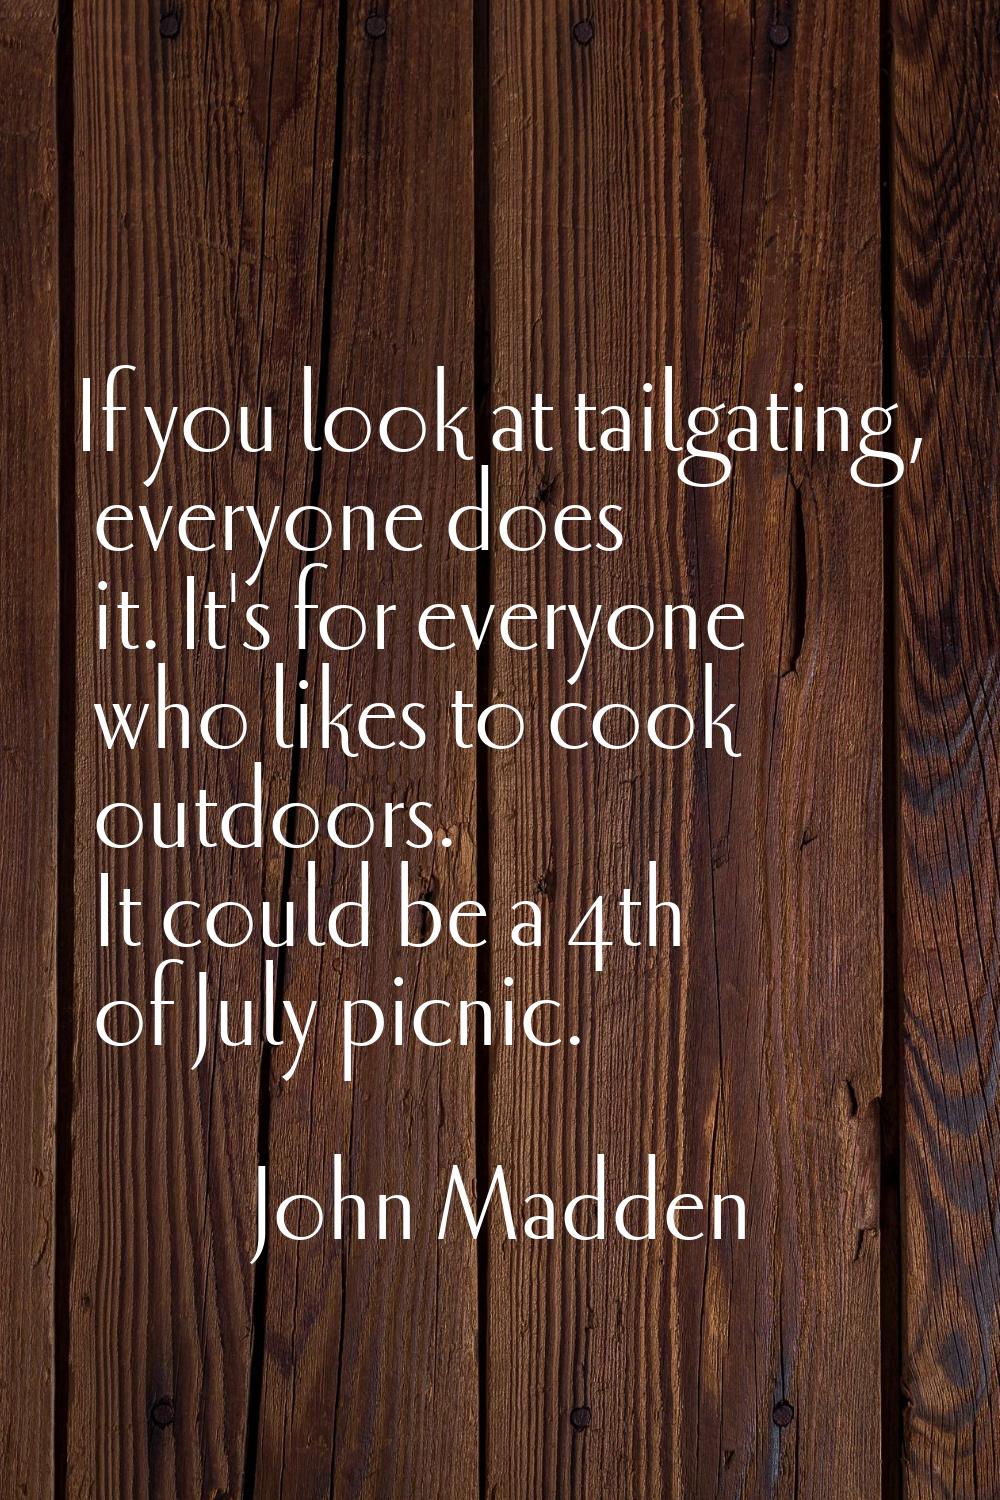 If you look at tailgating, everyone does it. It's for everyone who likes to cook outdoors. It could